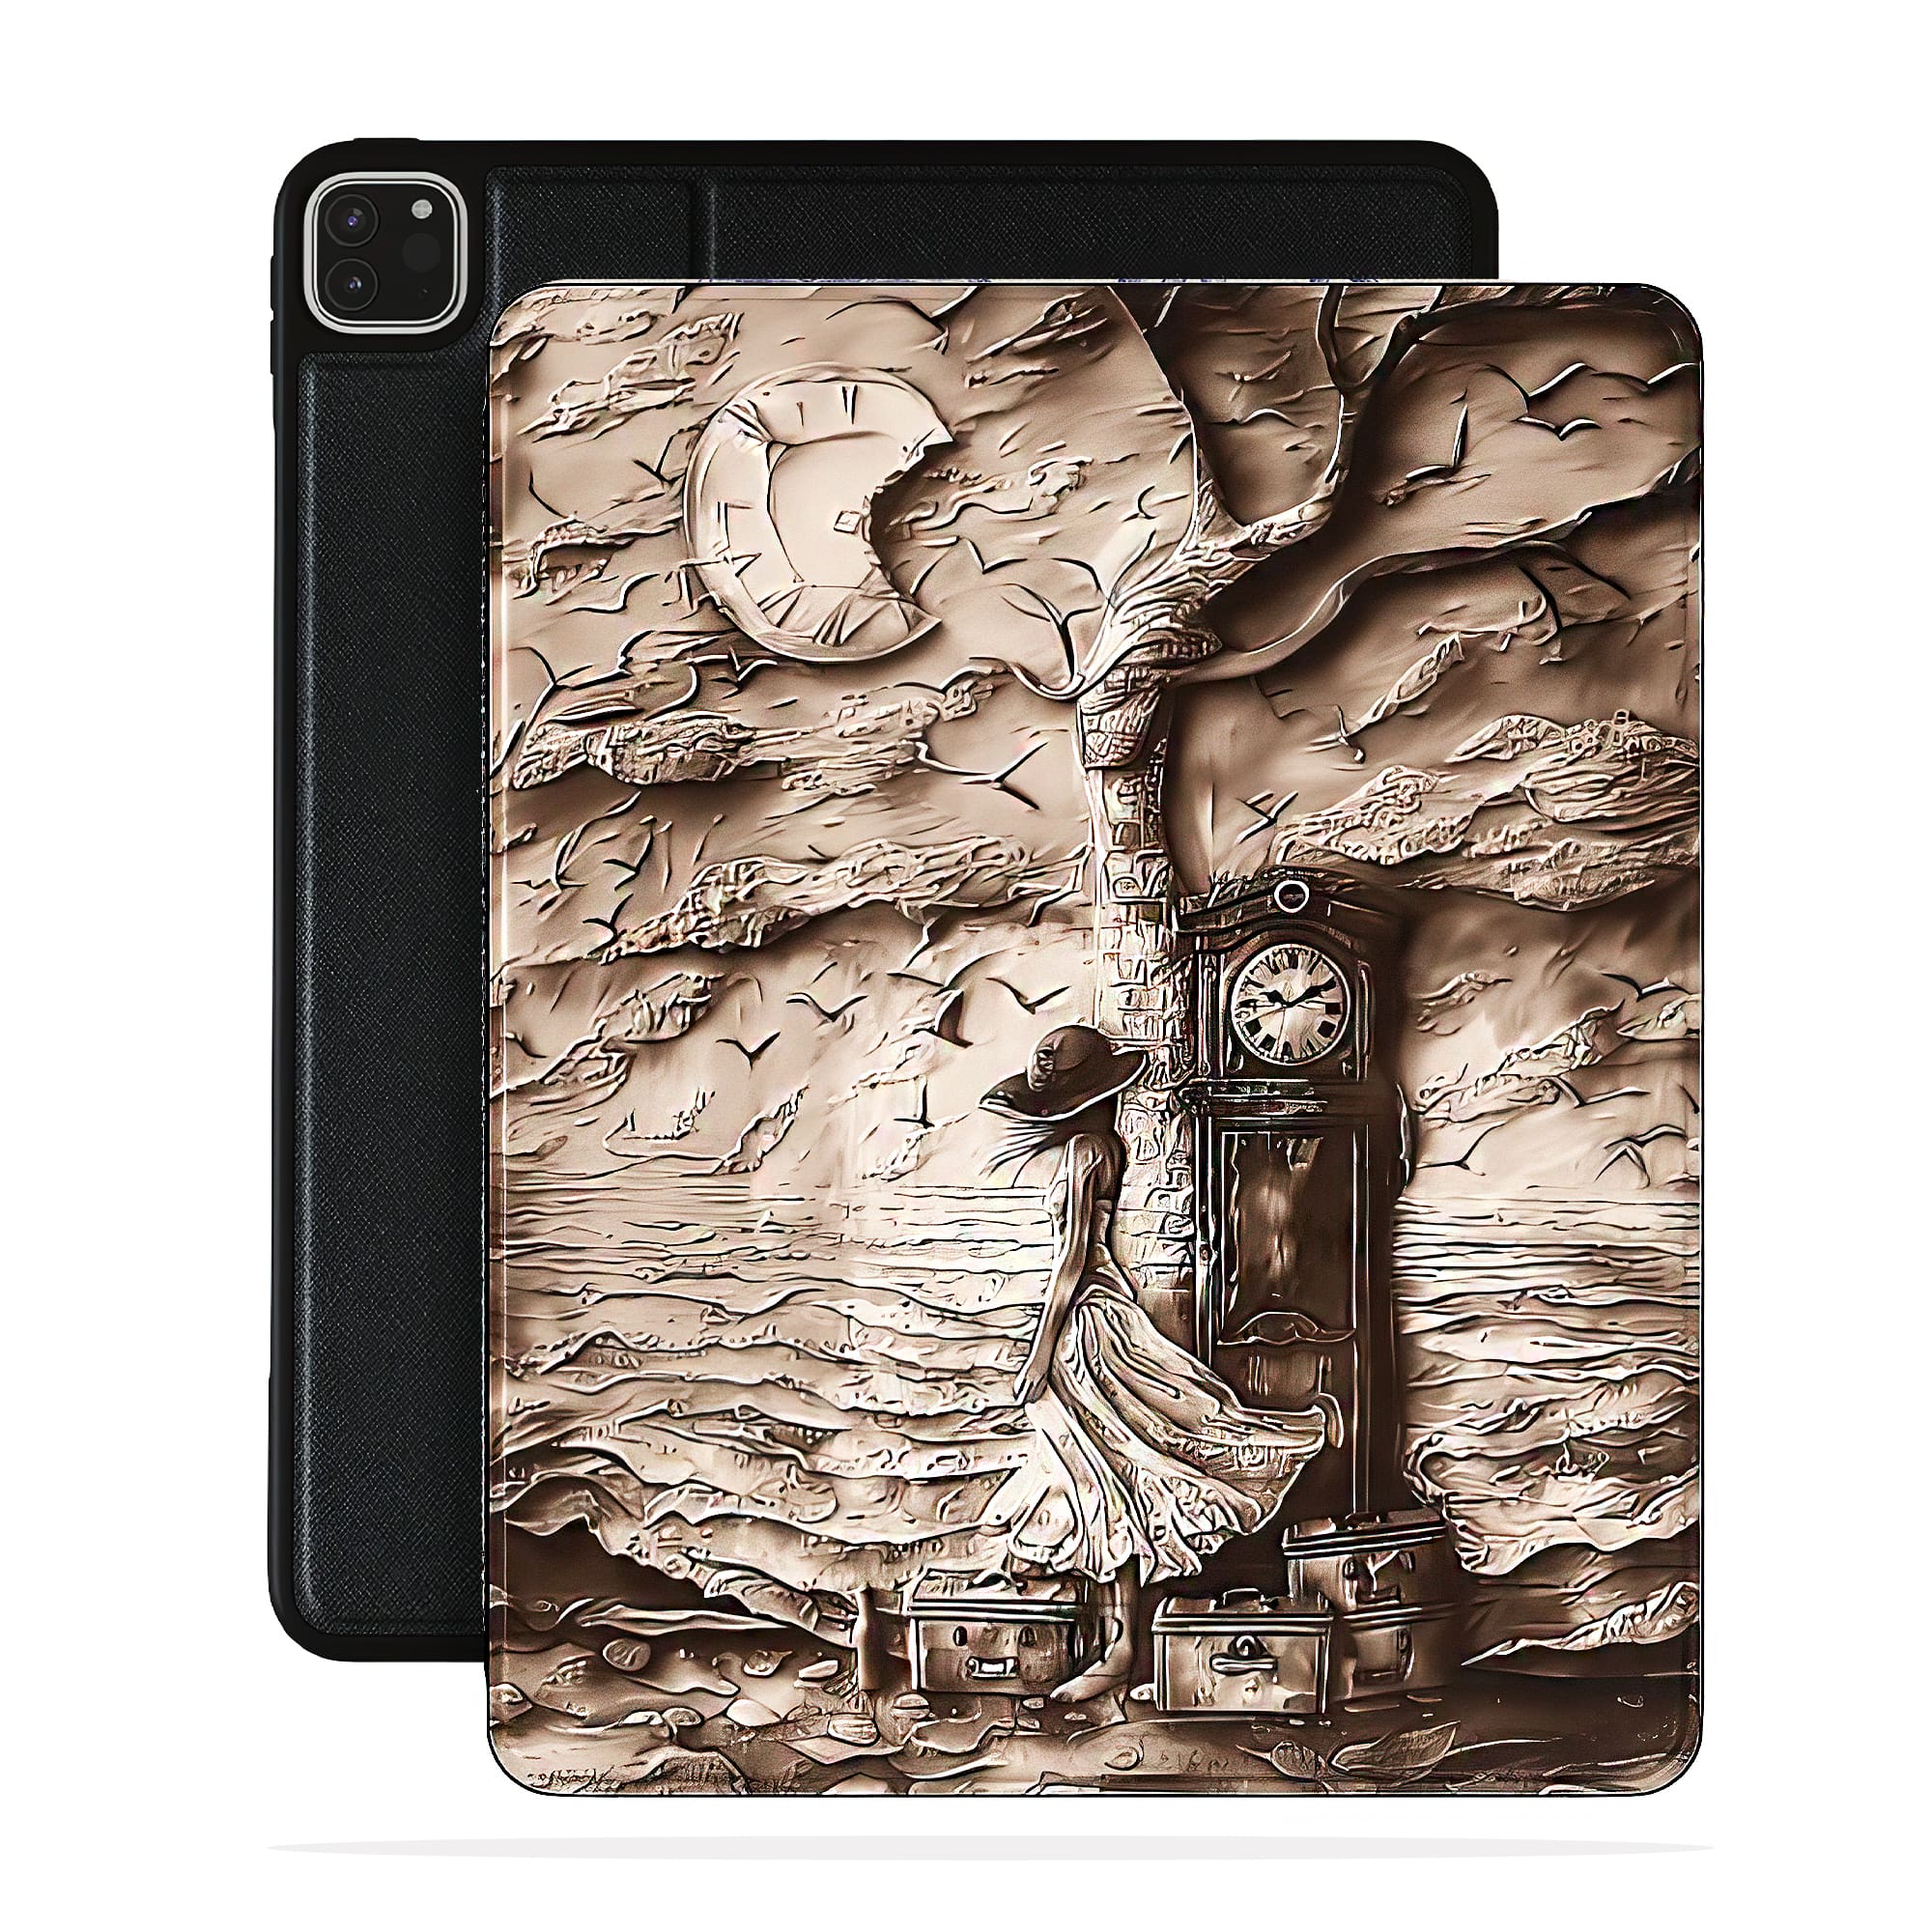 HOURS OF ABSENCE - IPAD CASE charlotte-paris